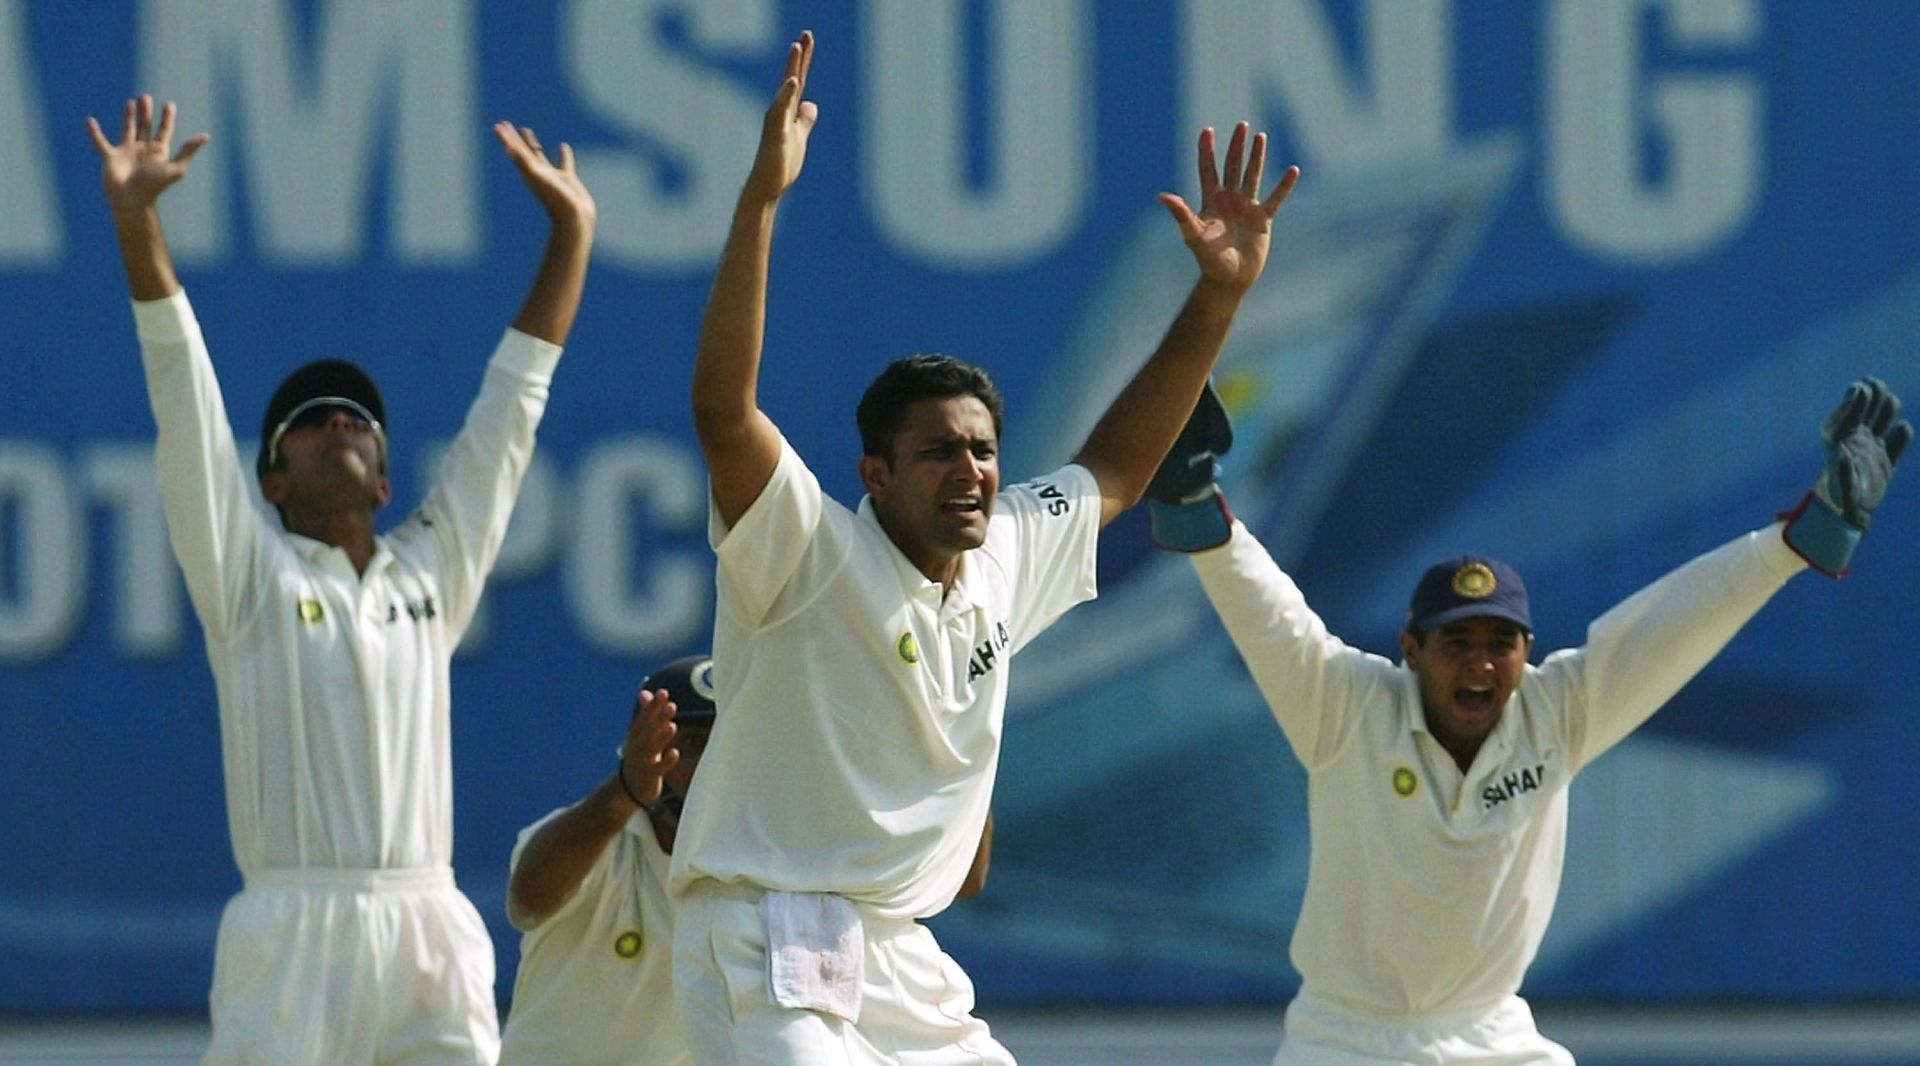 Former India leg-spinner Anil Kumble. Pic: Getty Images